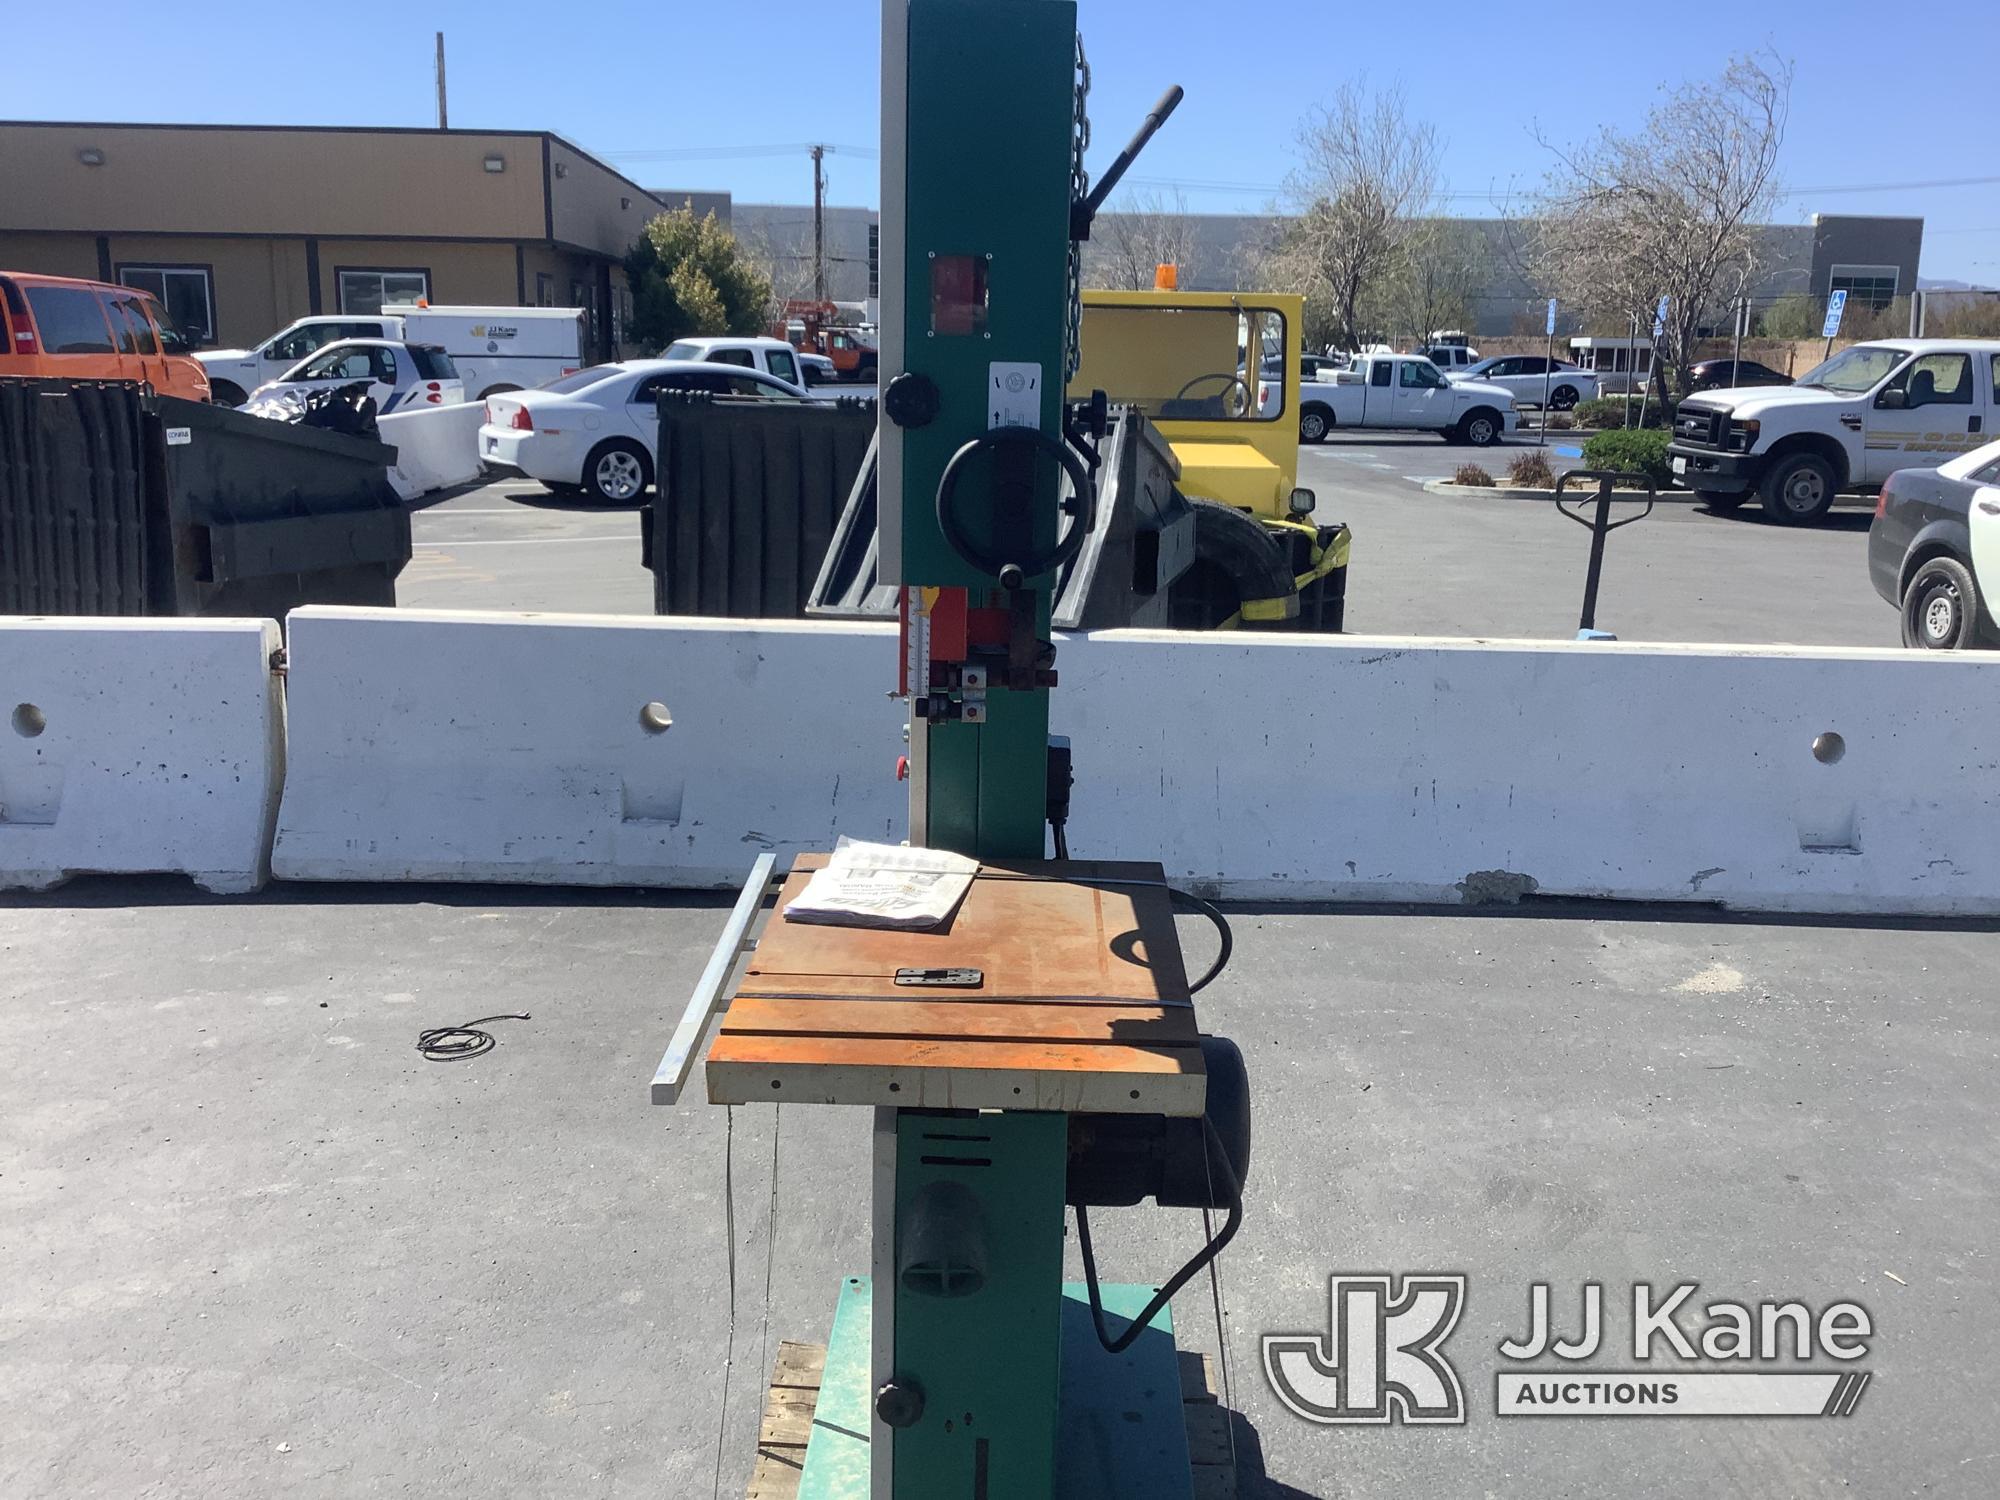 (Jurupa Valley, CA) 1 Grizzly Heavy Duty Bandsaw (Saw) NOTE: This unit is being sold AS IS/WHERE IS